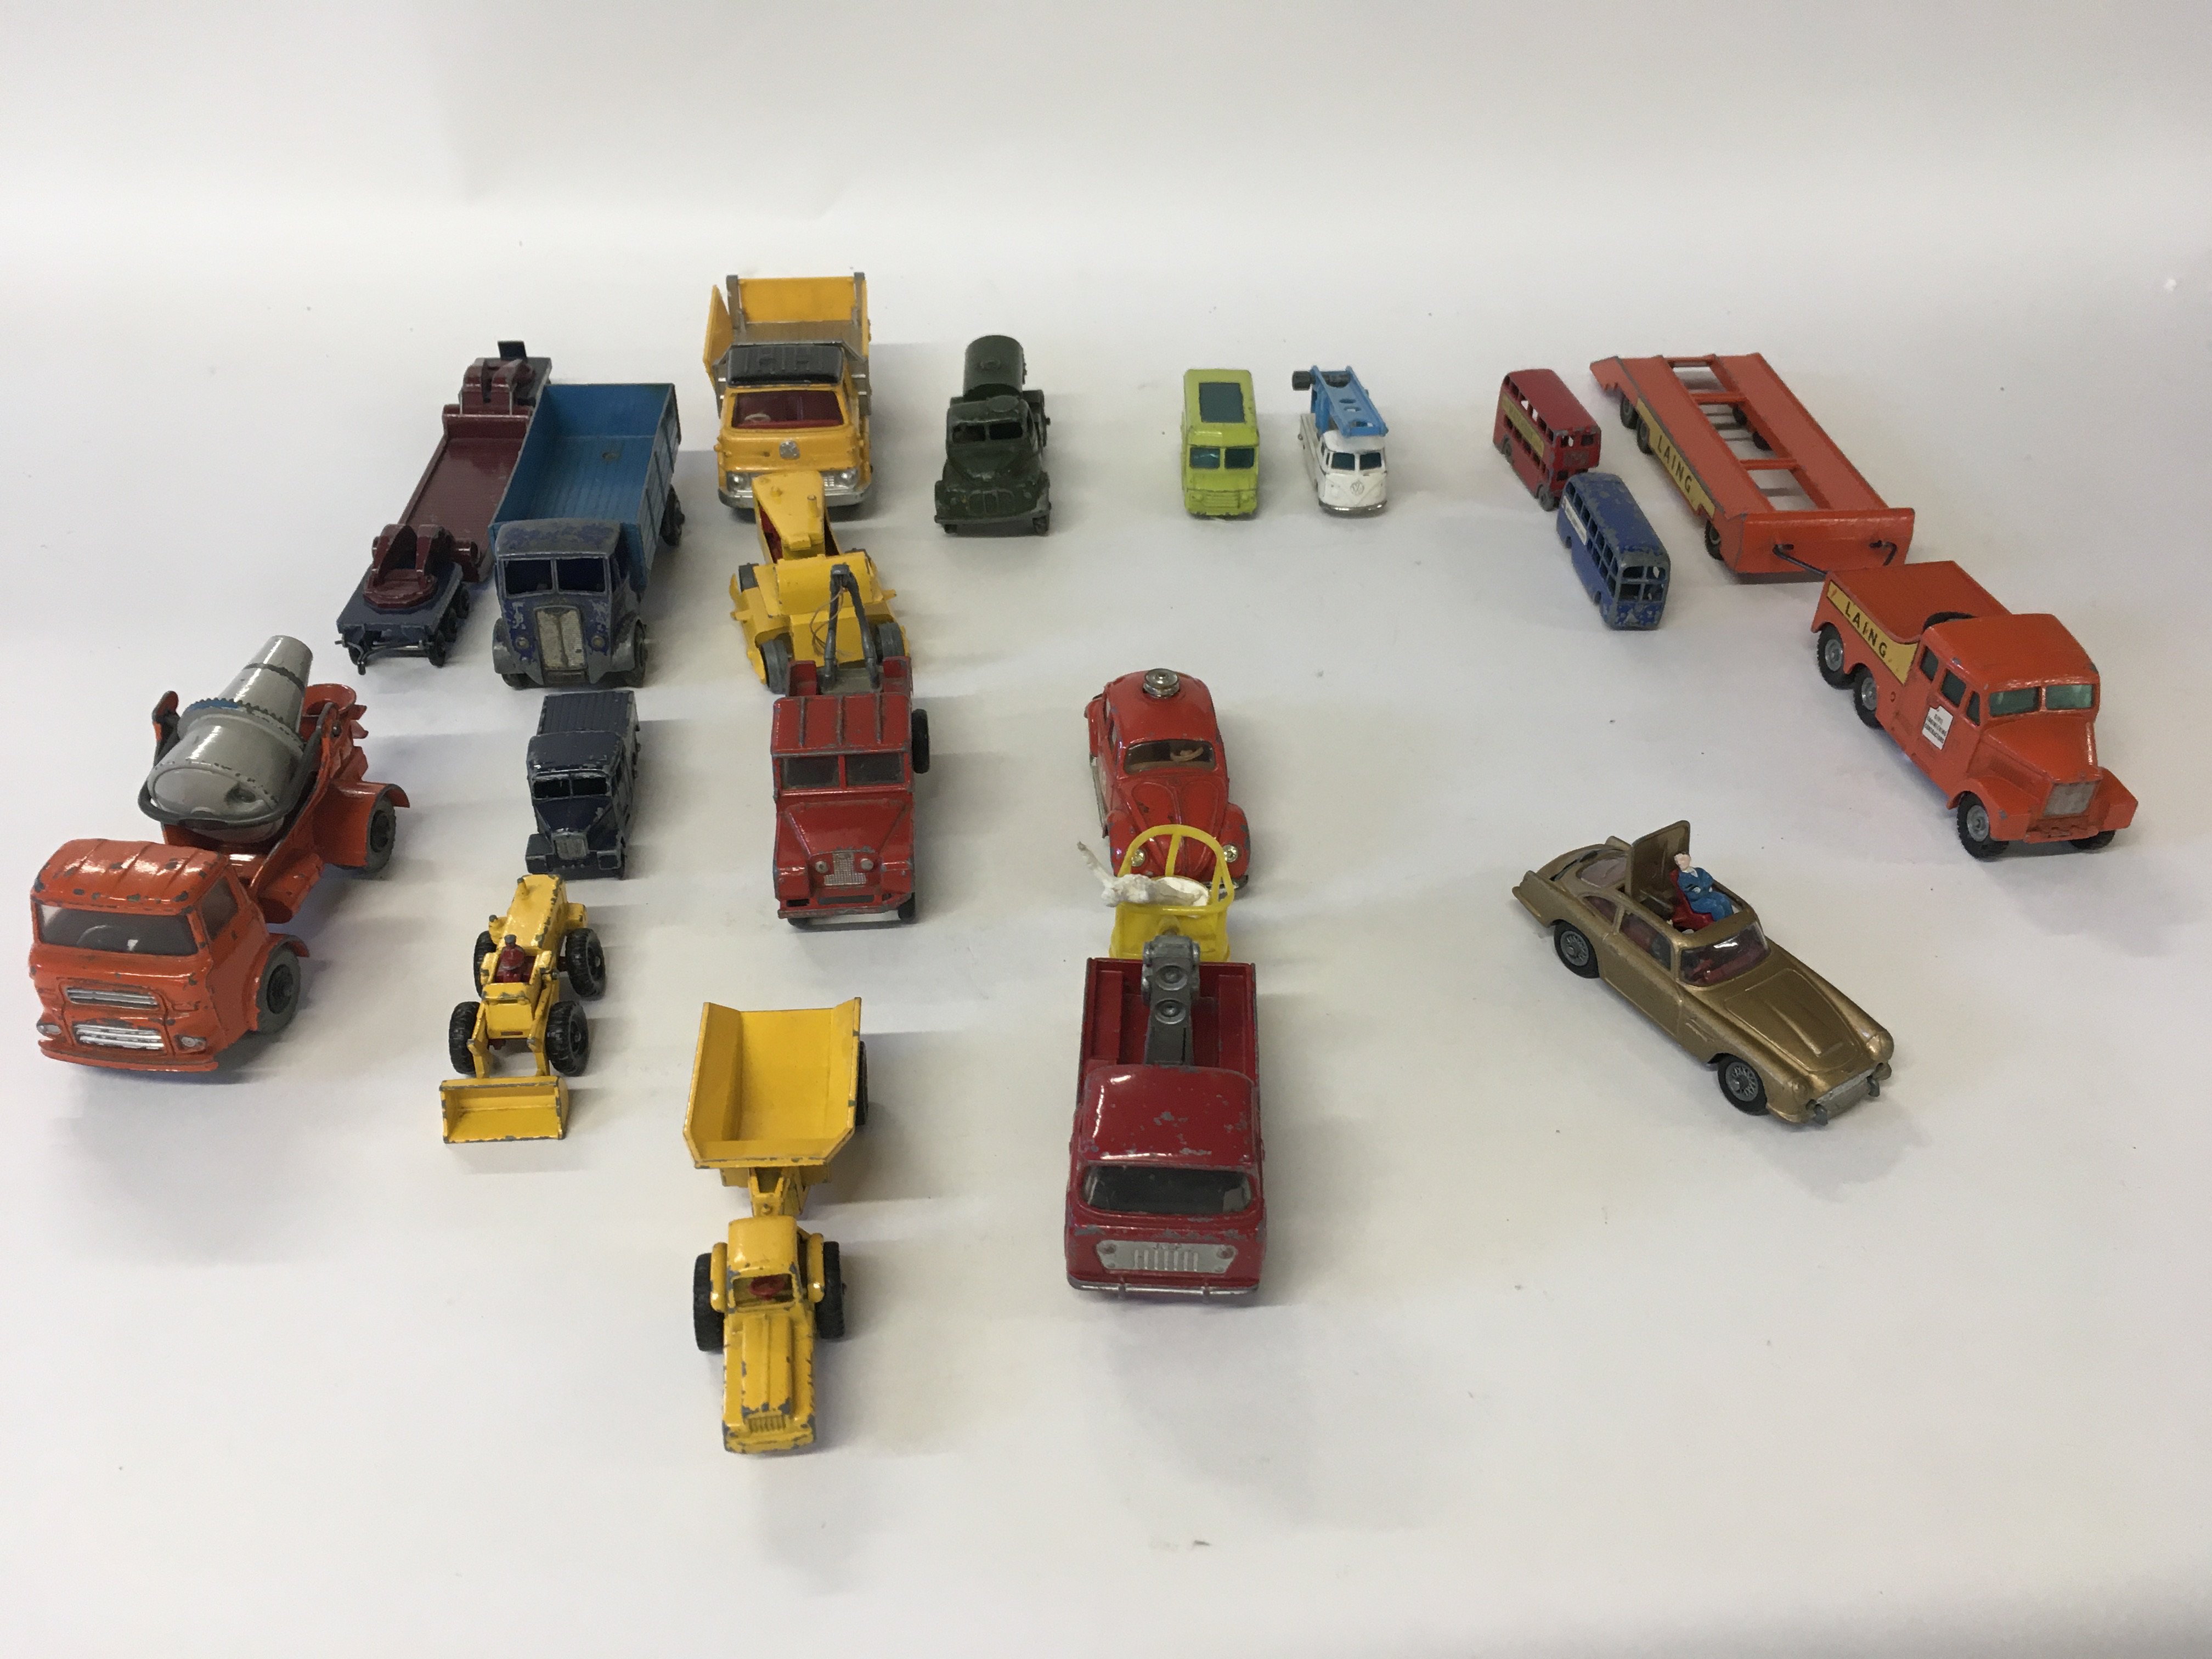 A collection of Playworn 18 diecast model vehicles by Matchbox..corgi..Husky. Includes golden